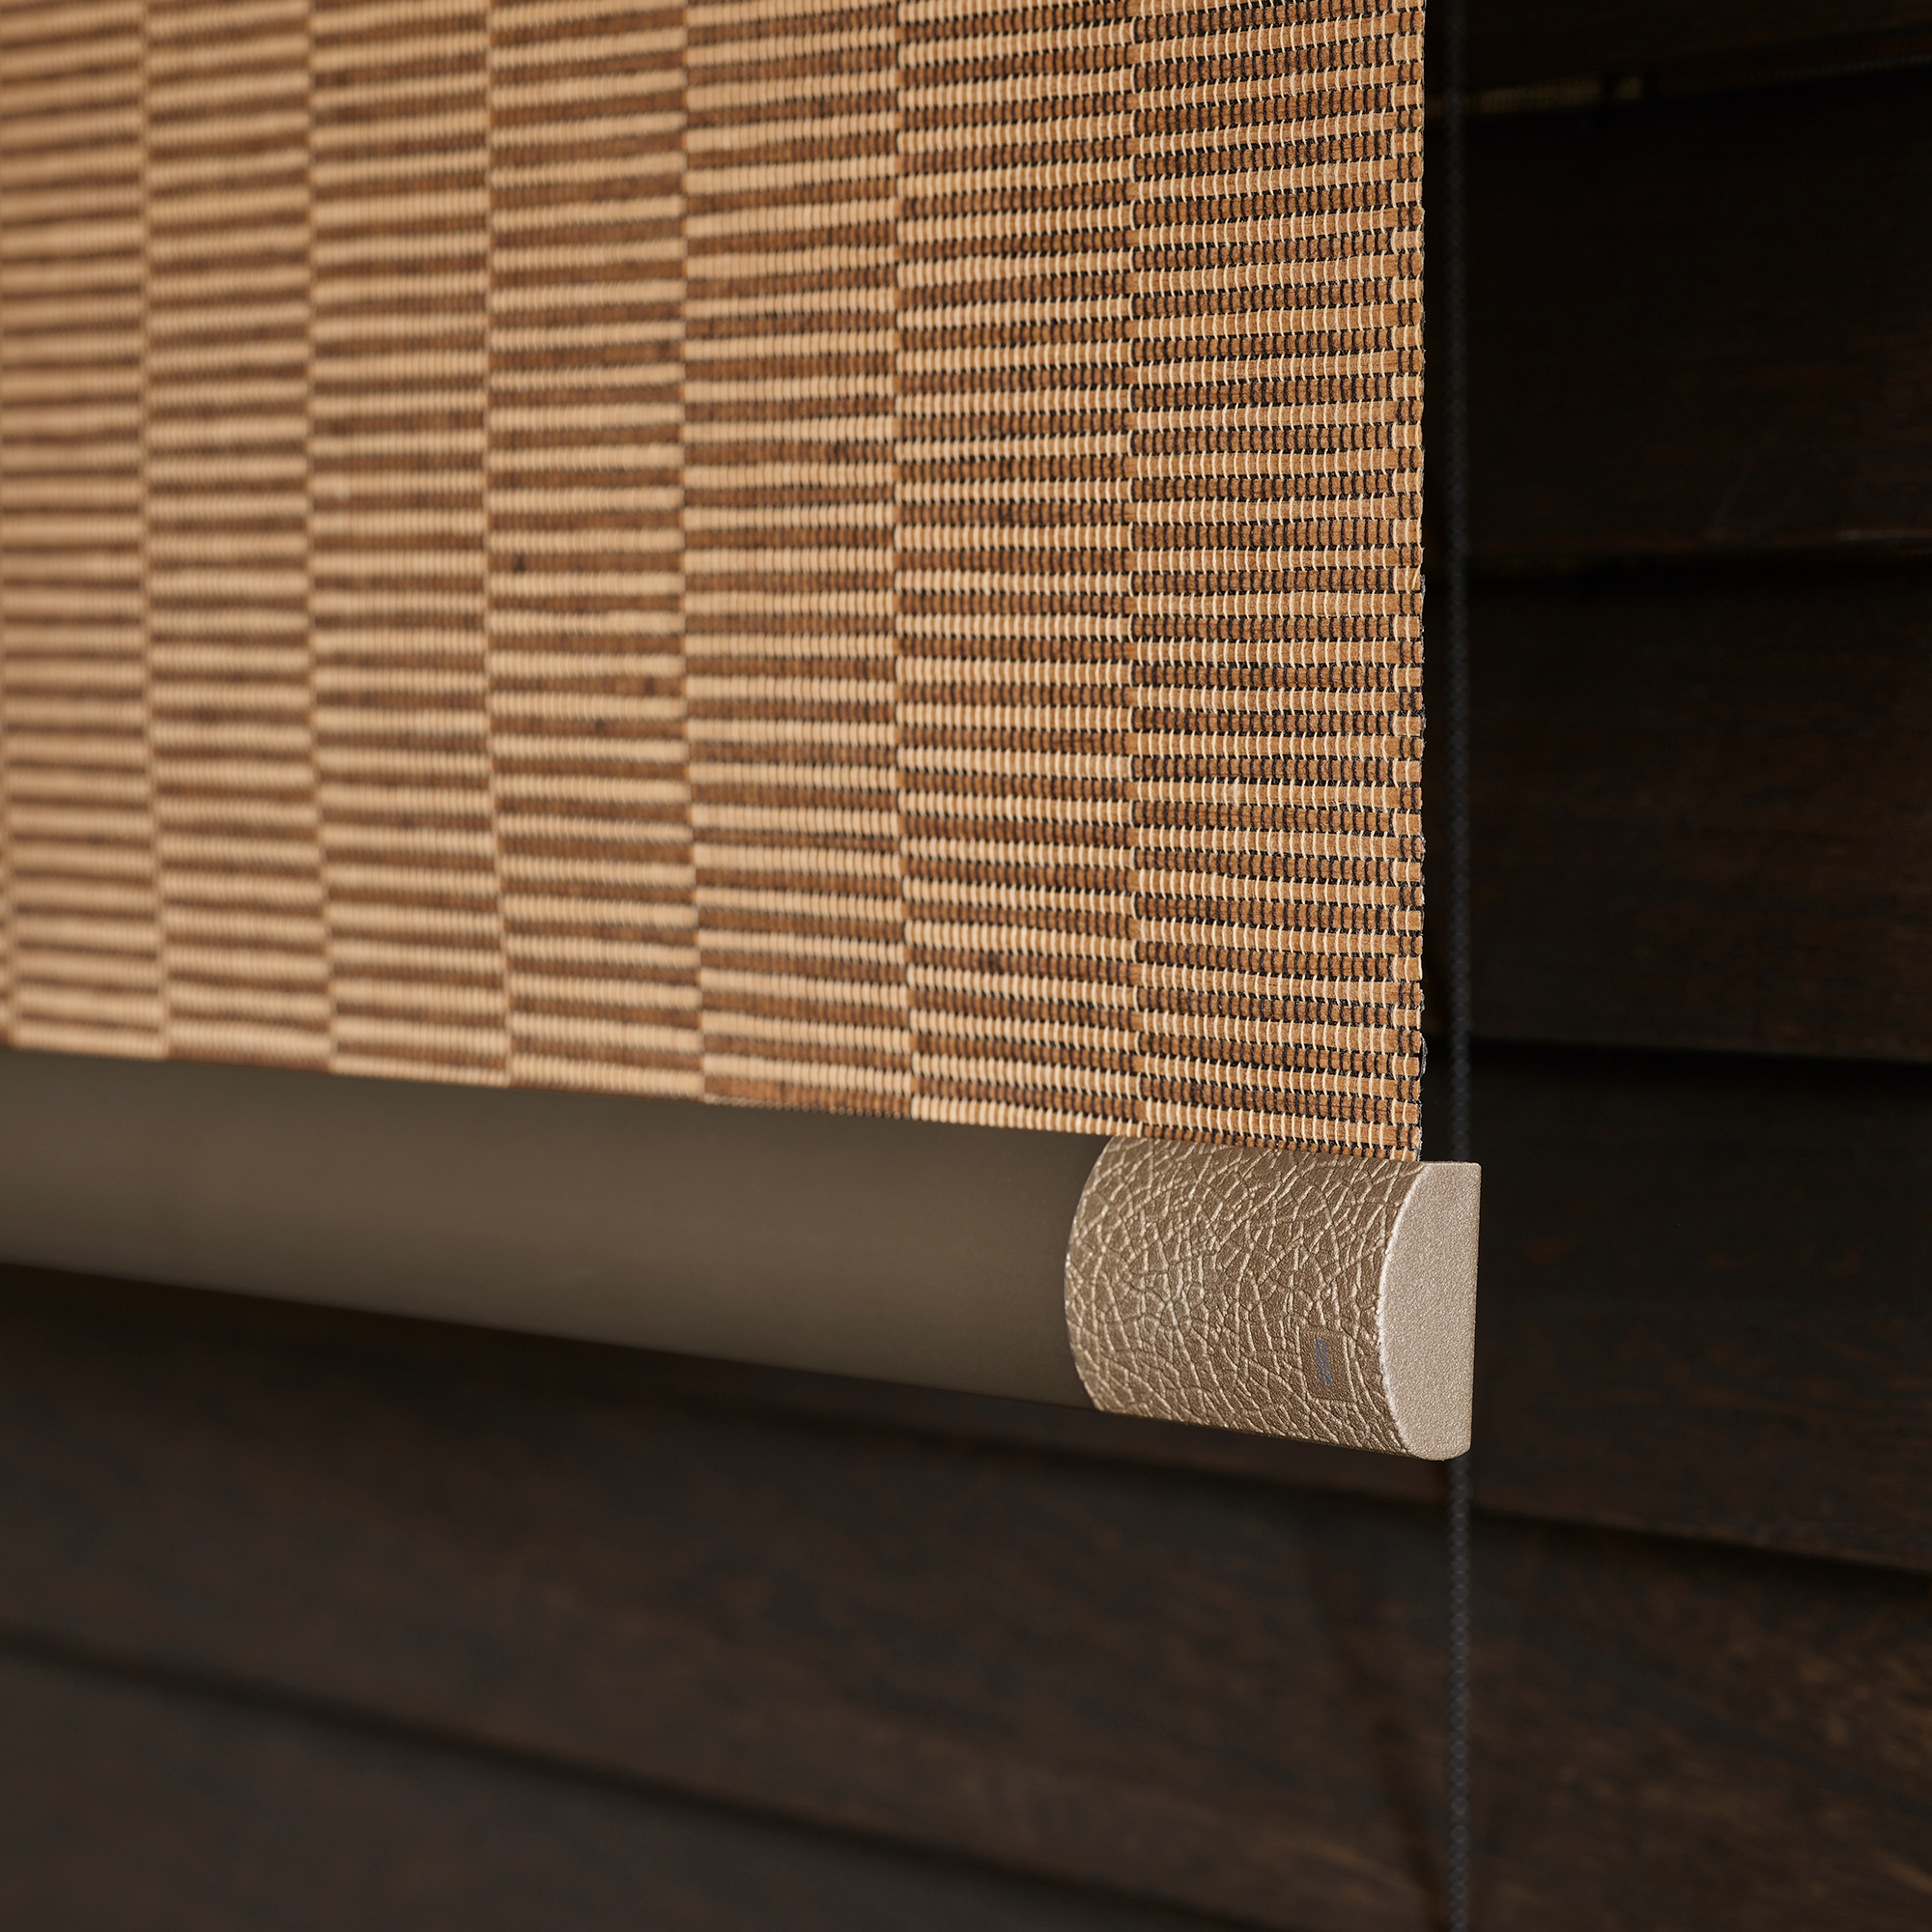 Inside Blinds - Craft and nature - window decoration - window coverings - natural materials - Kamani 20 - croco bronze night